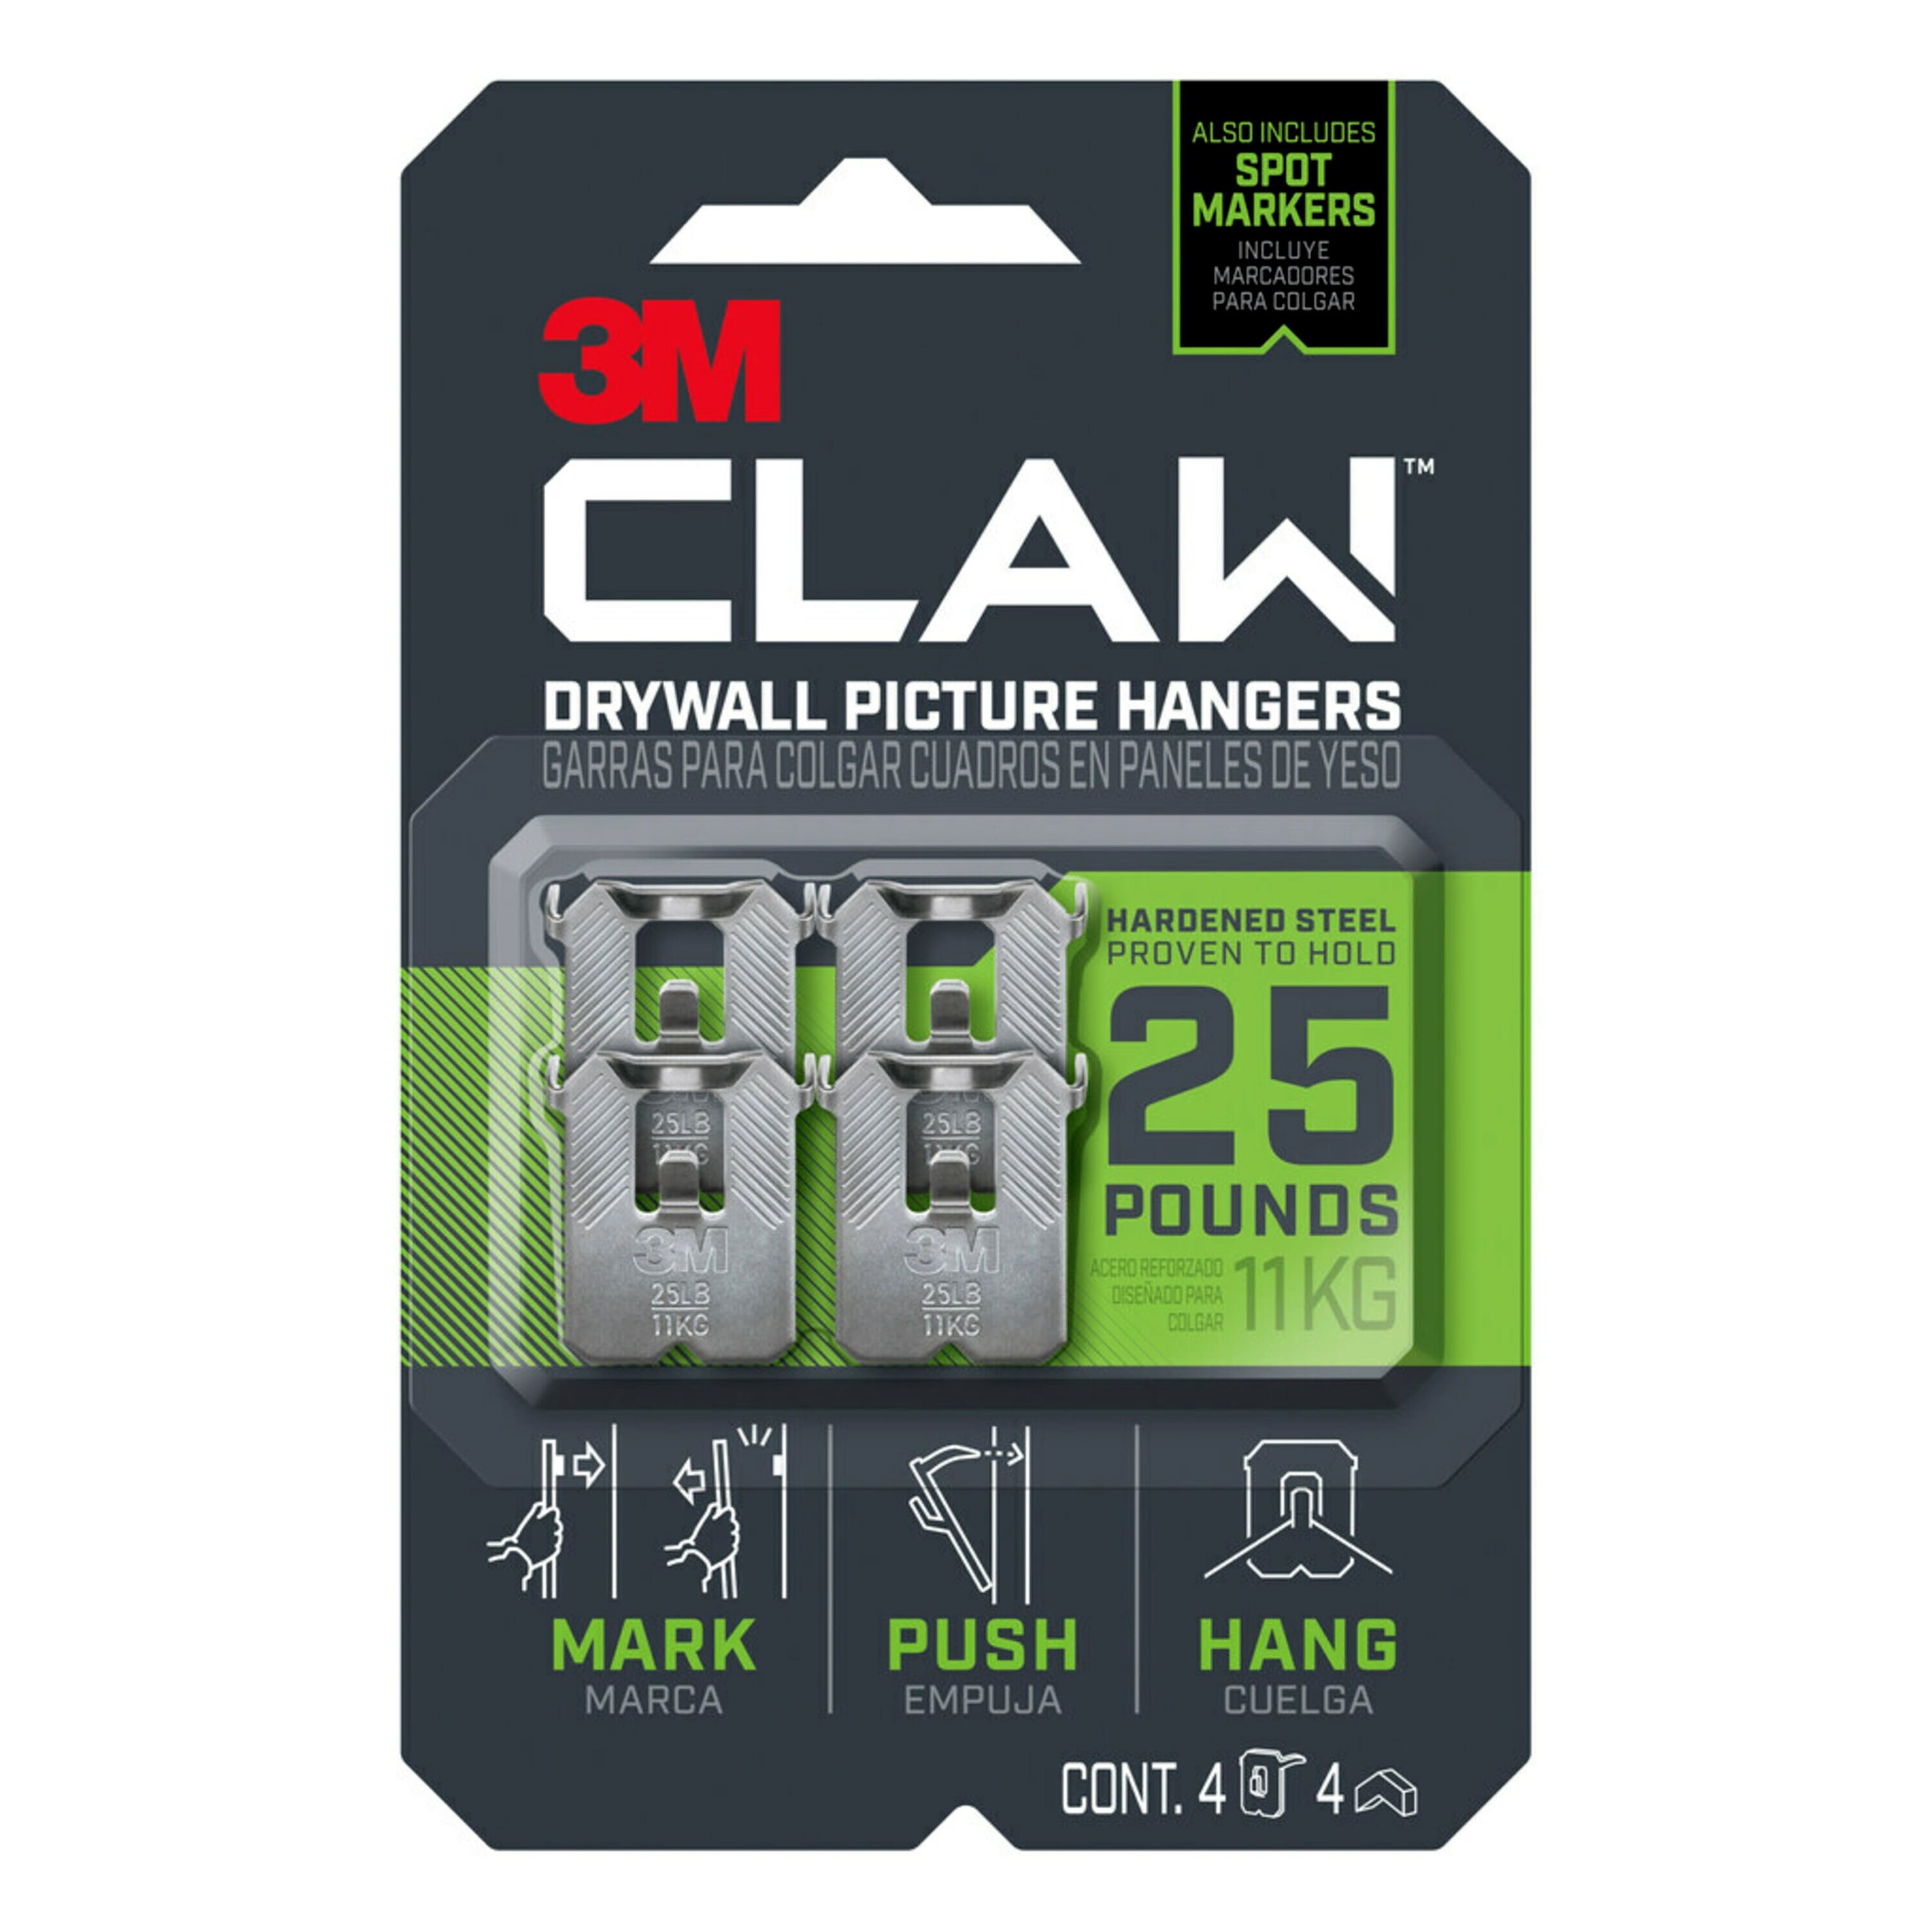 3M CLAW™ 25lb. Drywall Picture Hangers, 4ct.